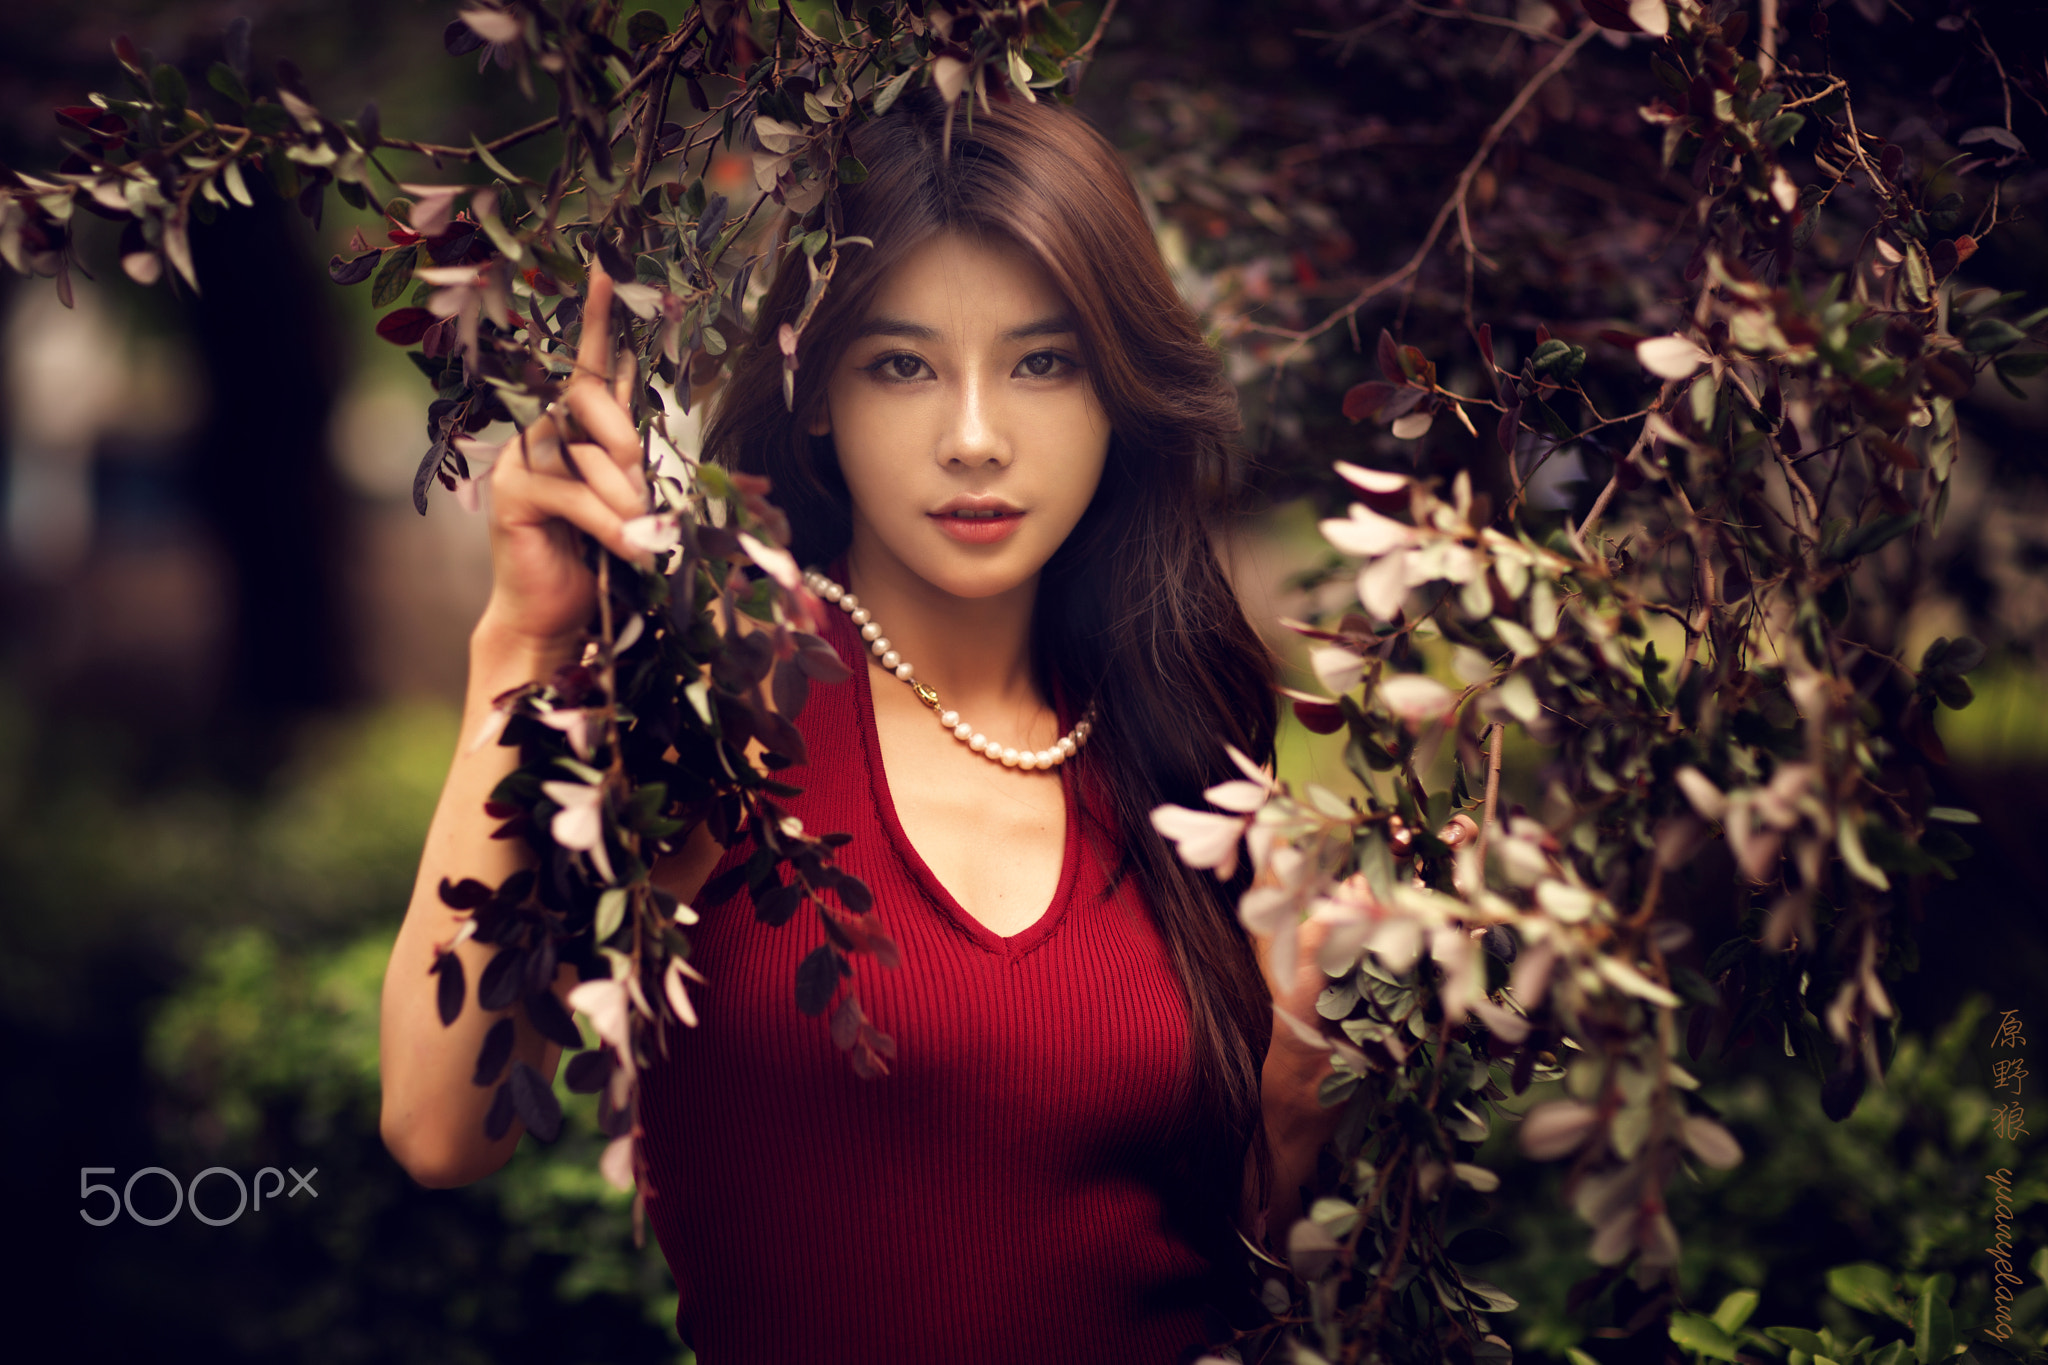 People 2048x1365 Yuan Yelang women Asian brunette looking at viewer beads leaves fall portrait red clothing